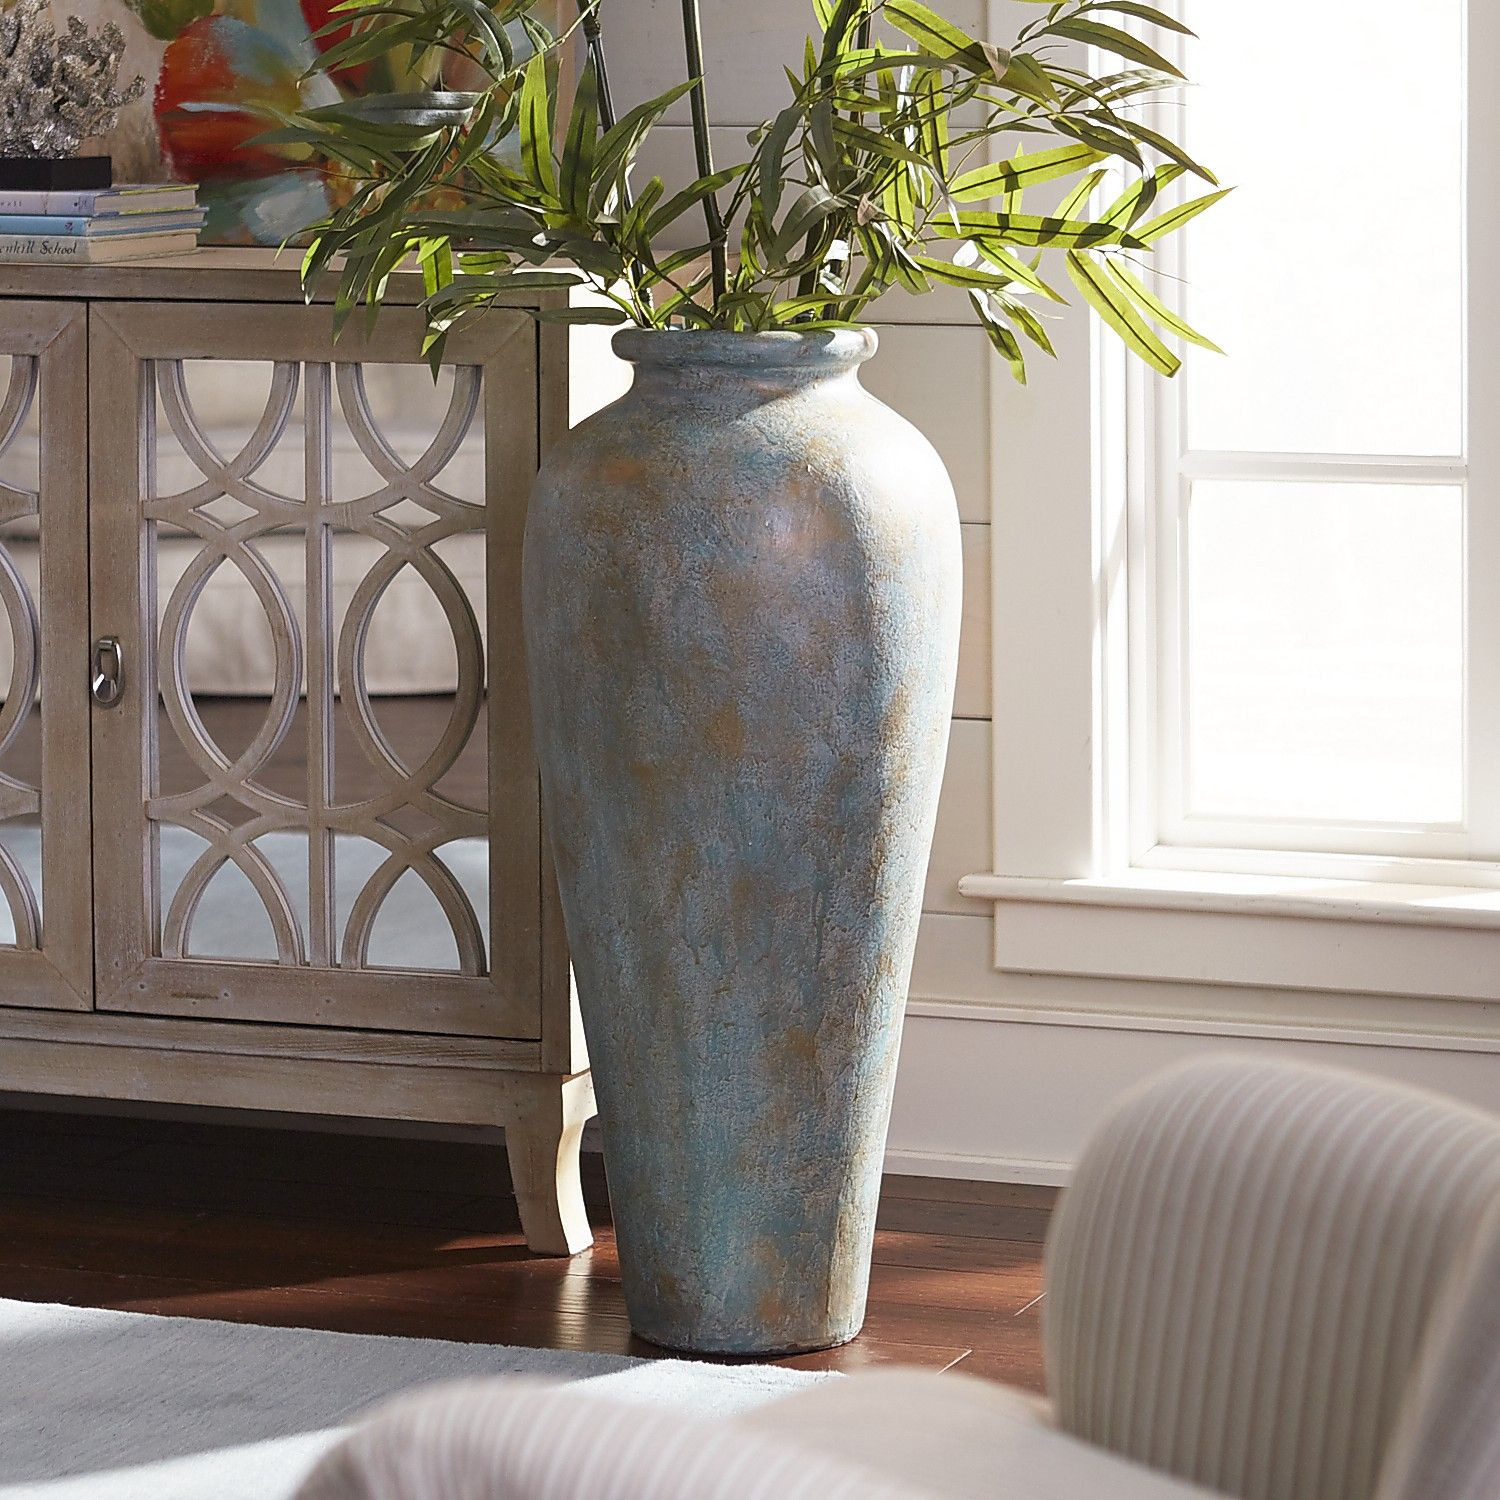 21 Fabulous Tall asian Floor Vases 2022 free download tall asian floor vases of blue green patina urn floor vase products pinterest flooring inside blue green patina urn floor vase